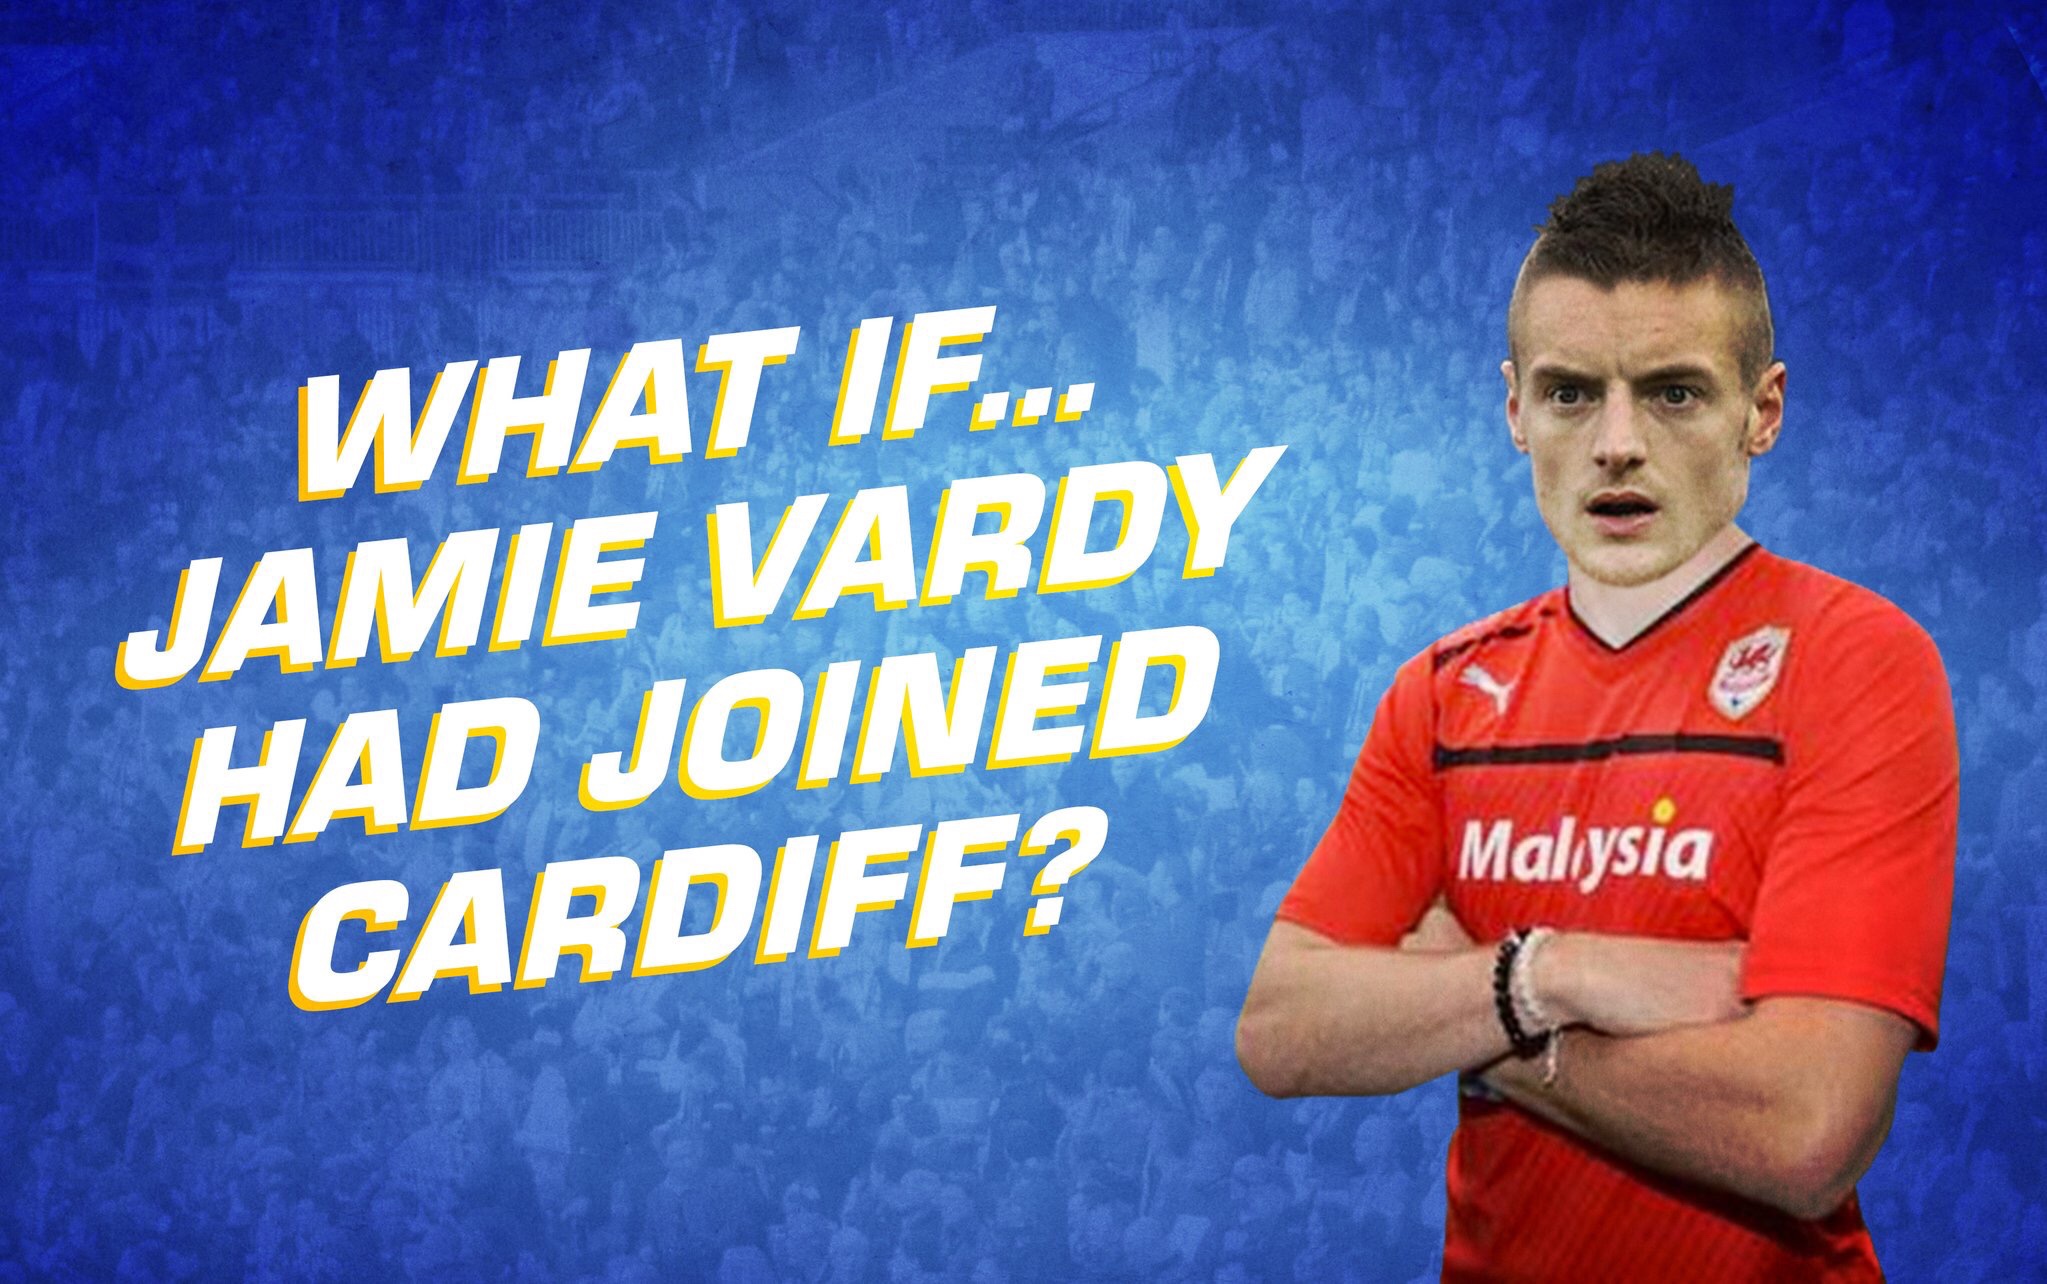 What if… Jamie Vardy had joined Cardiff